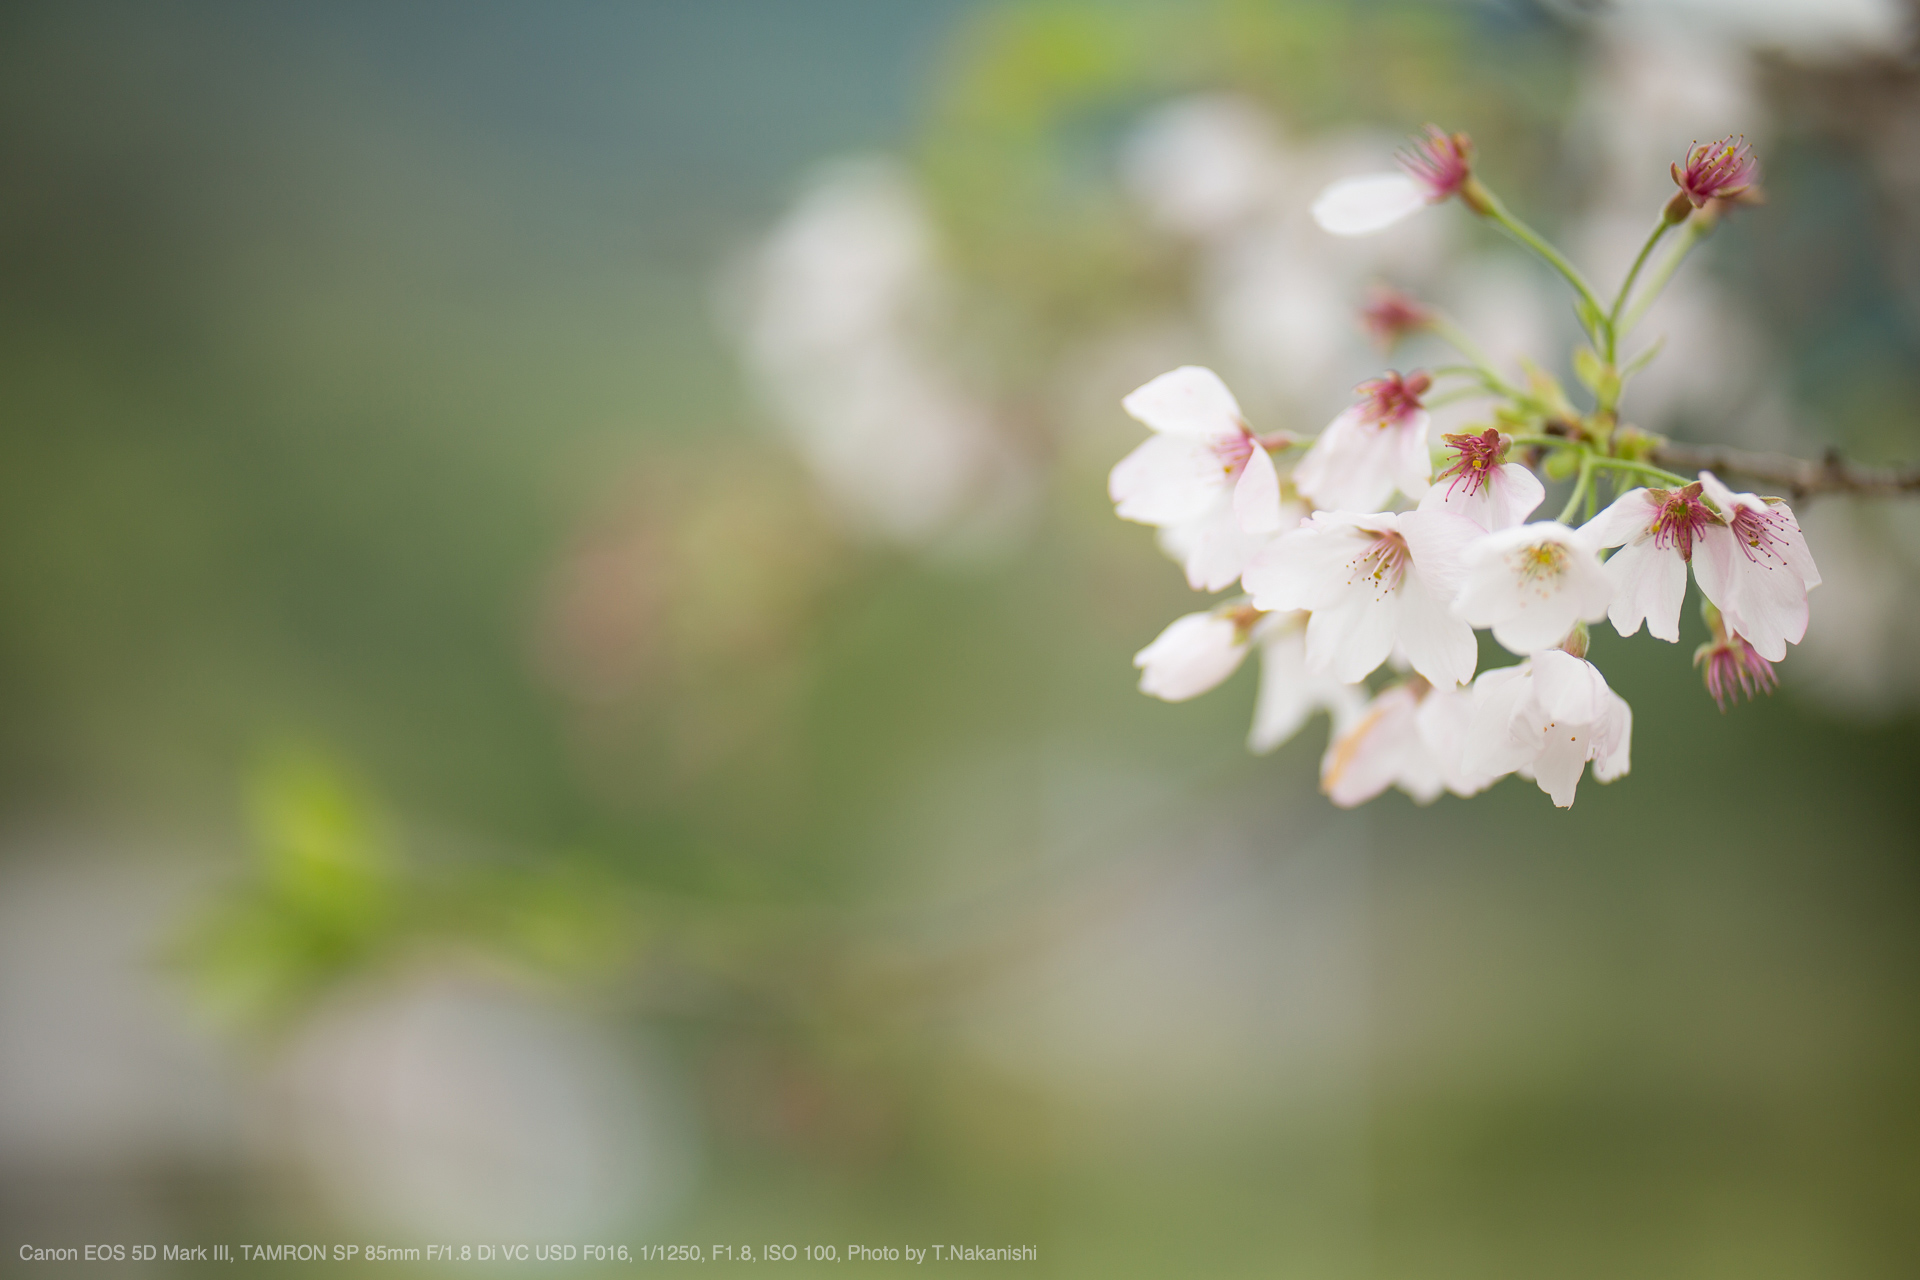 Canon EOS 5D Mark III, TAMRON SP 85mm F/1.8 Di VC USD F016, 1/1250, F1.8, ISO 100, Photo by T.Nakanishi